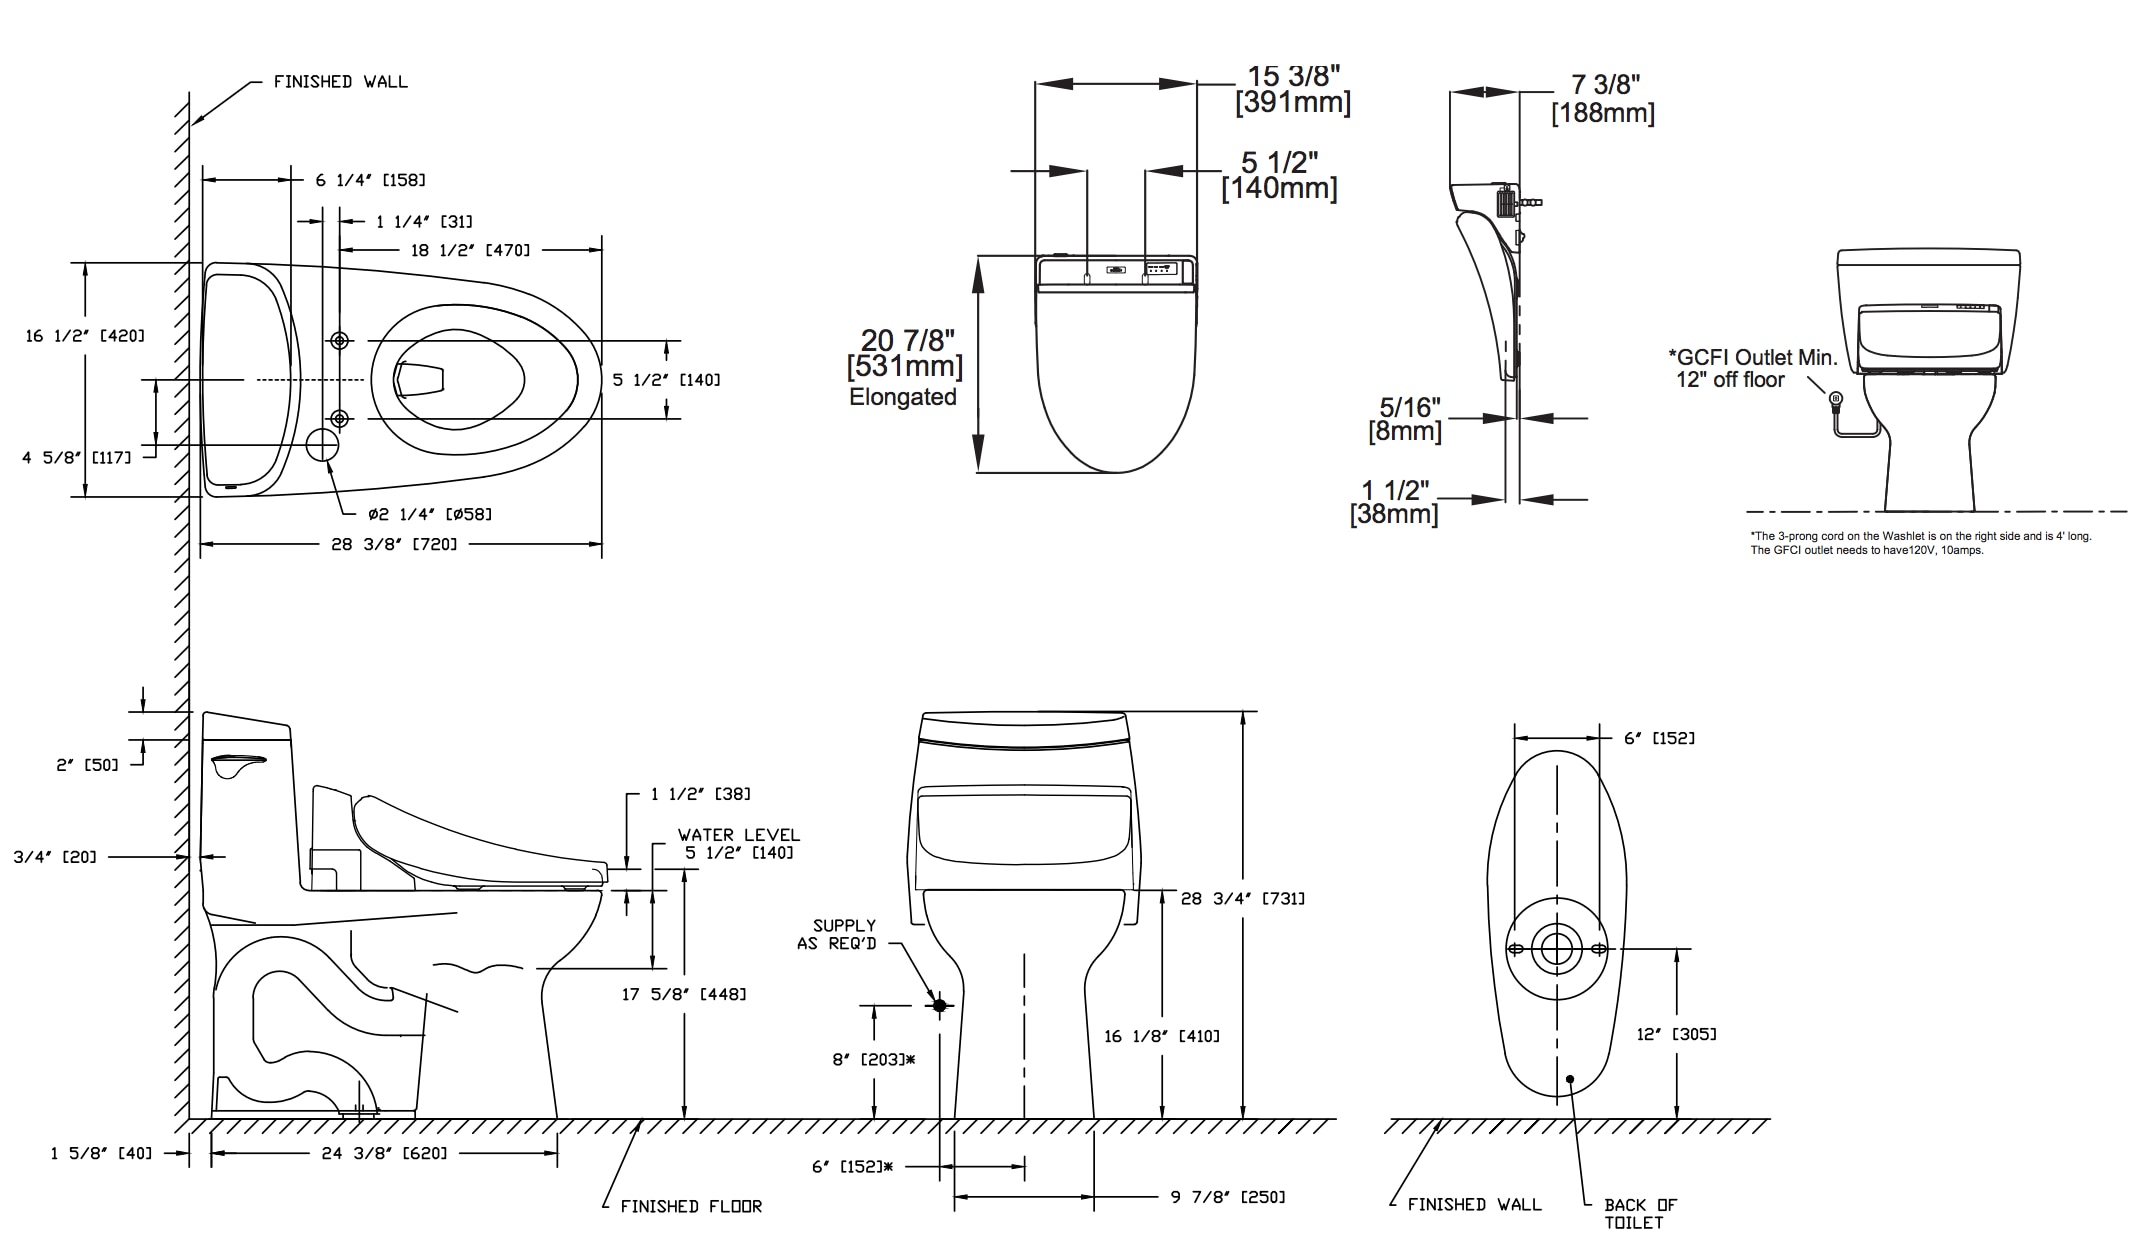 toto-ultramax-ii-1g-washlet-c200-one-piece-toilet-and-bidet-system-1.0-gpf-diagram.png